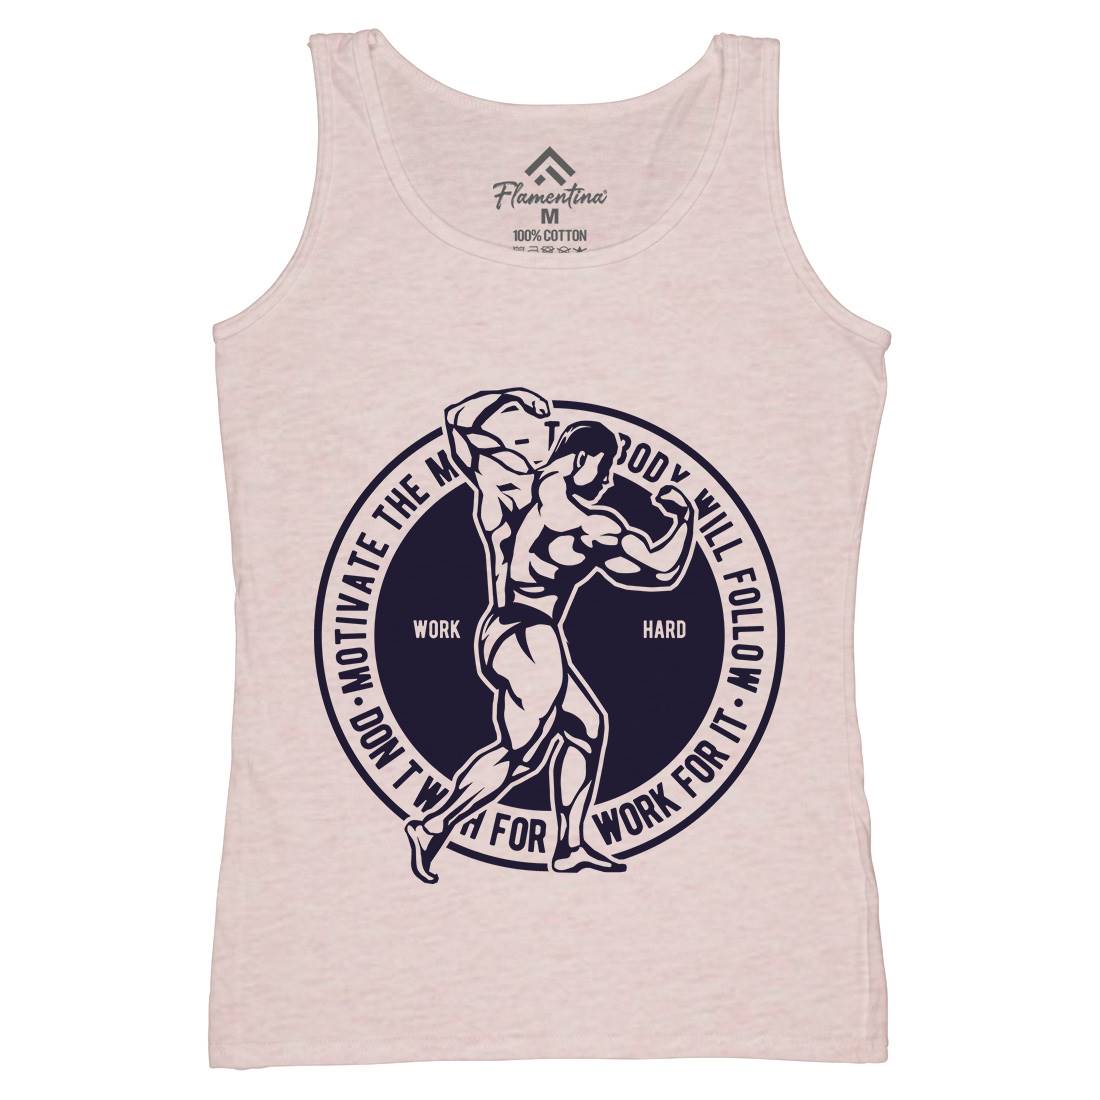 Motivate The Mind Womens Organic Tank Top Vest Gym A716